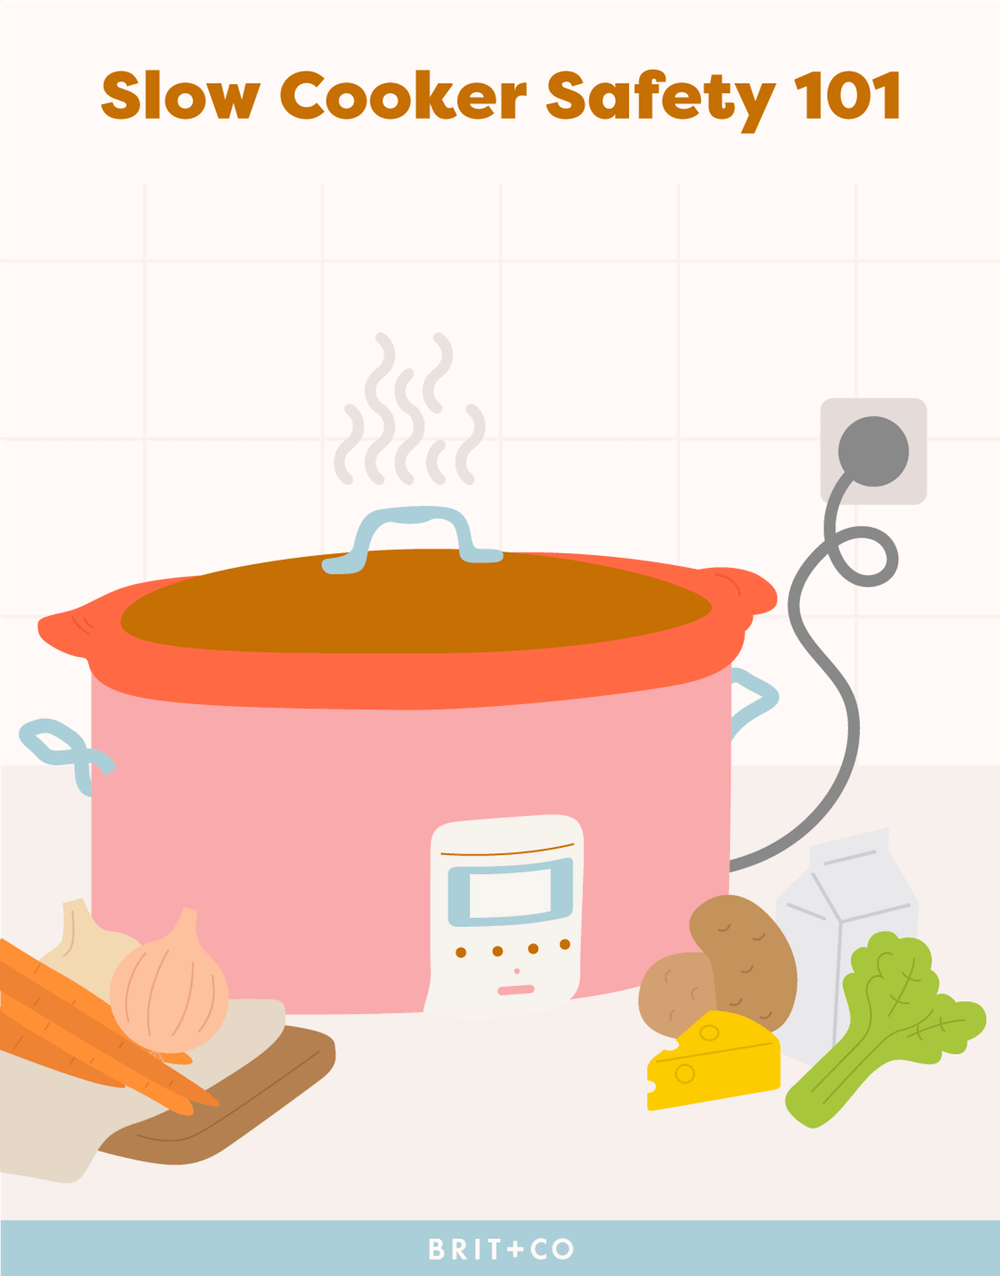 Tis the Season for Crock-Pots, But First Make Sure Yours is Safe